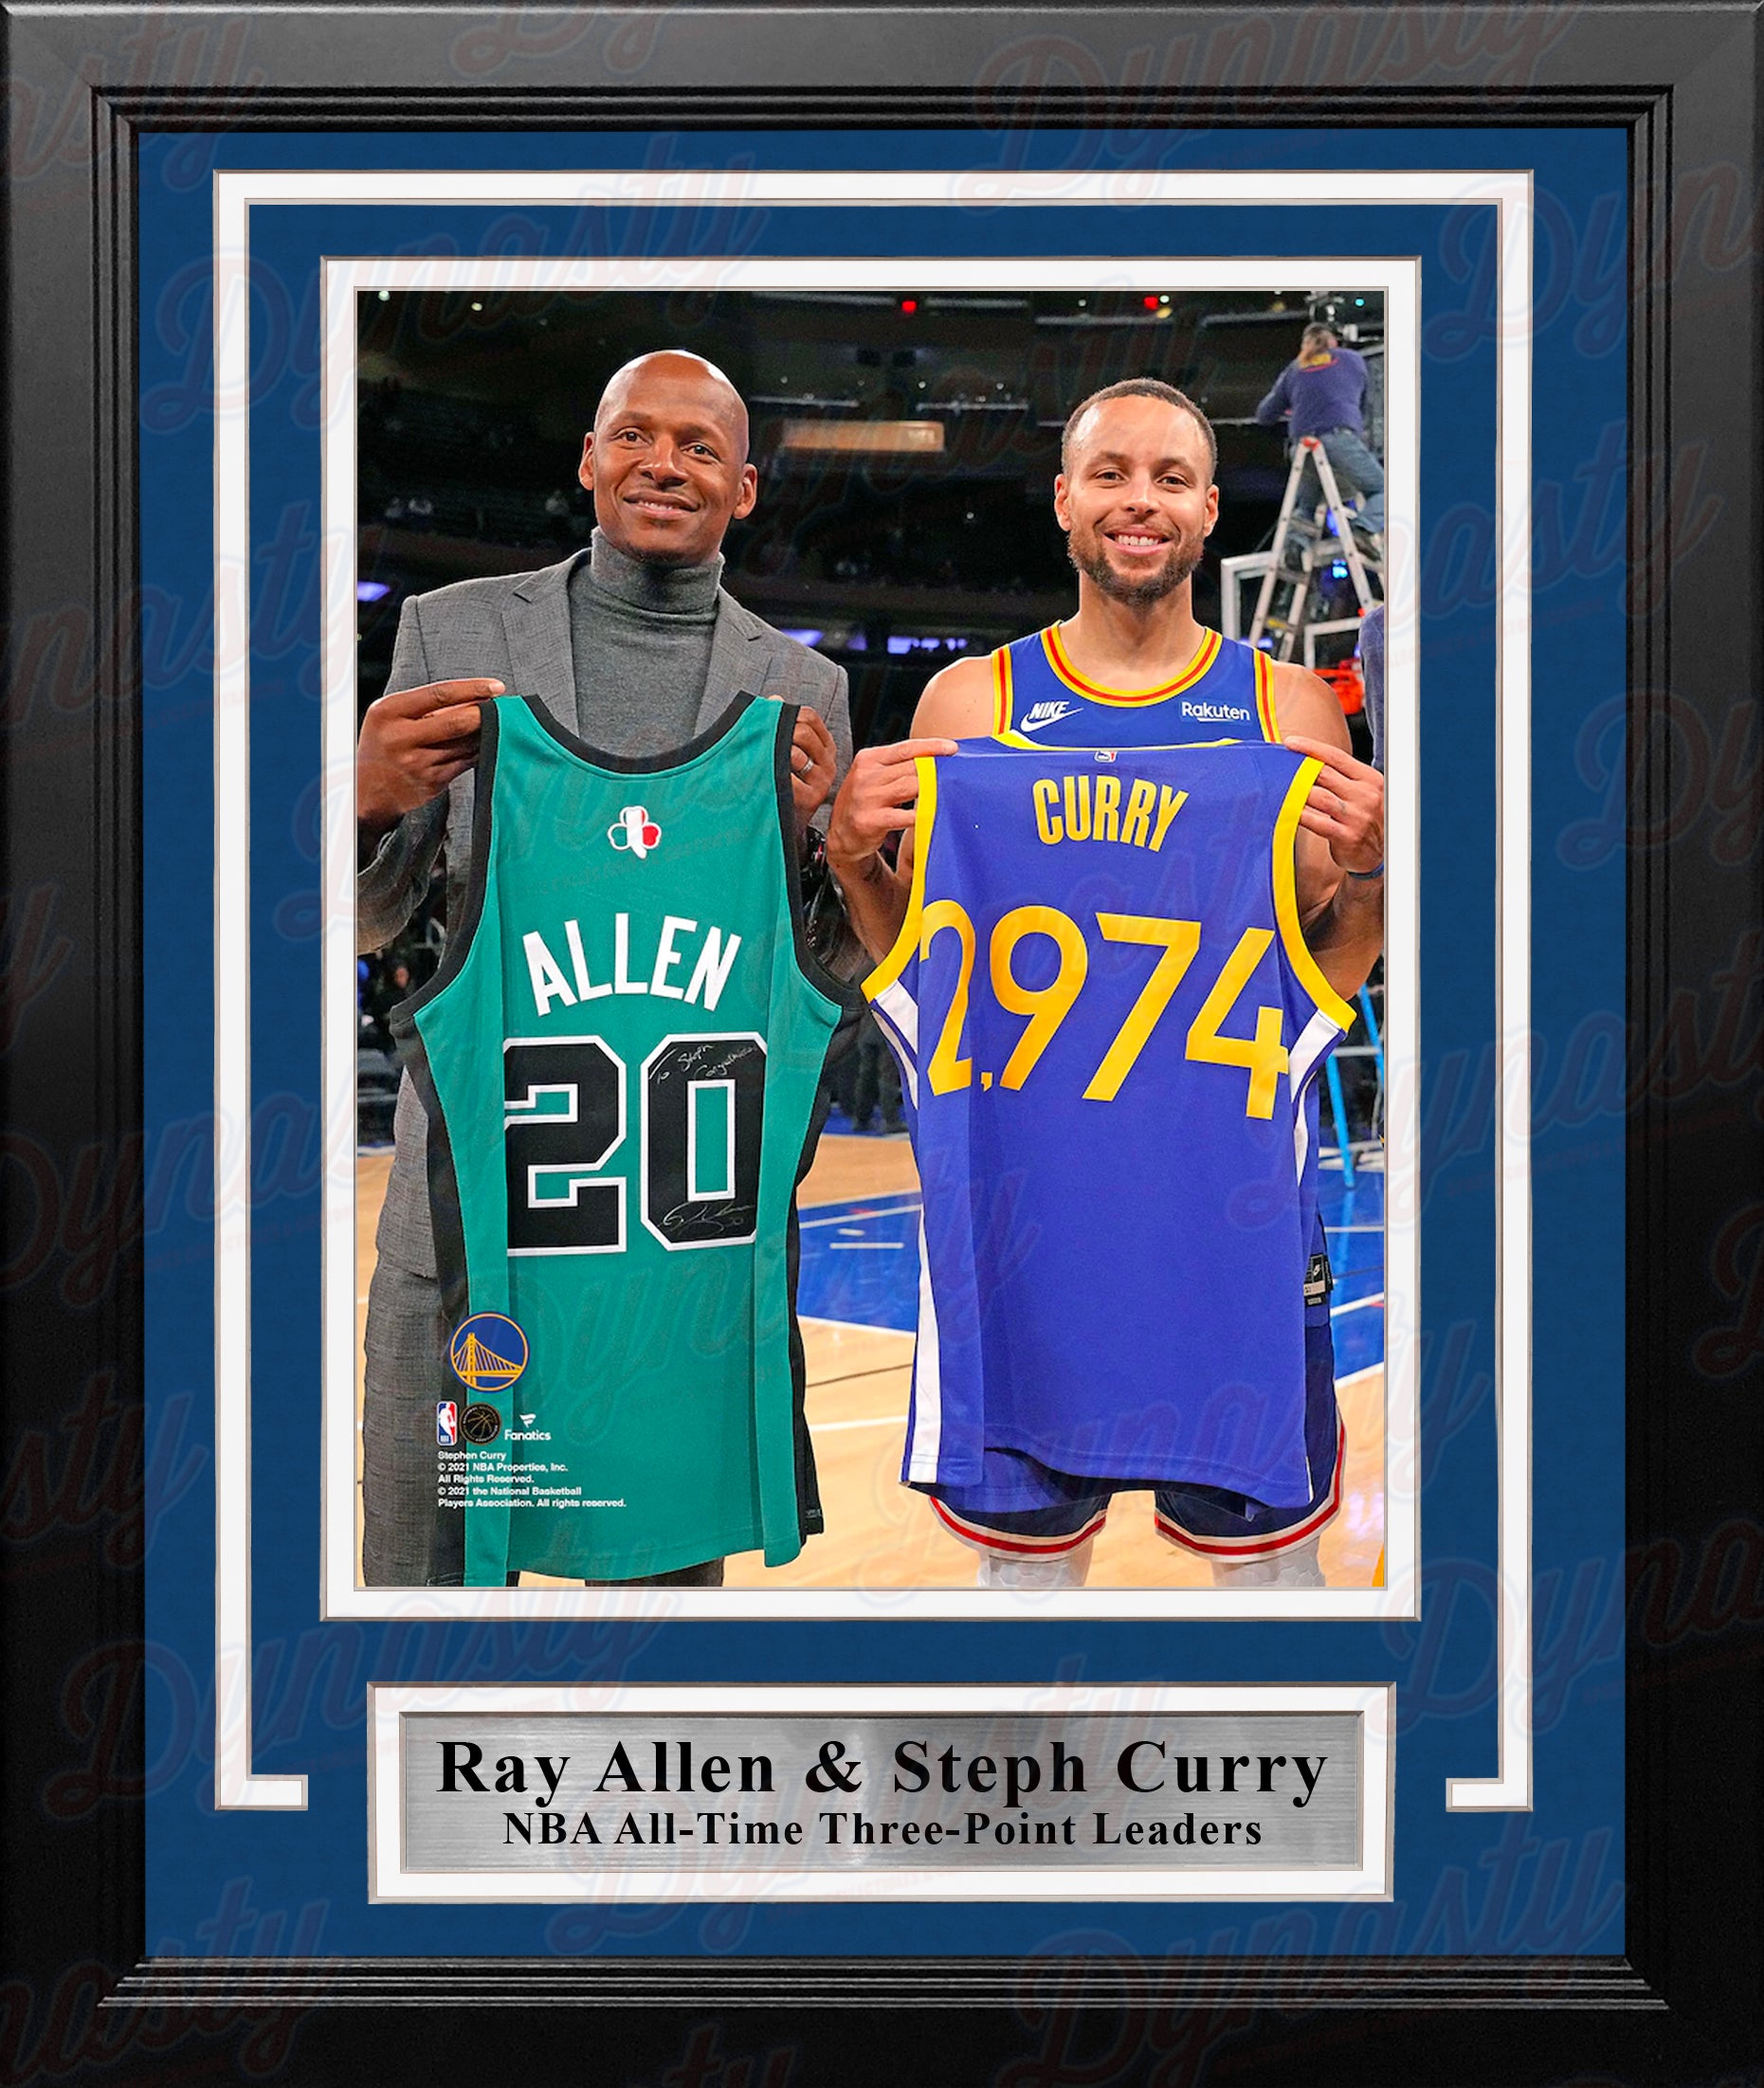 Ray Allen & Steph Curry 3-Point Record-Breaking Celebration 8